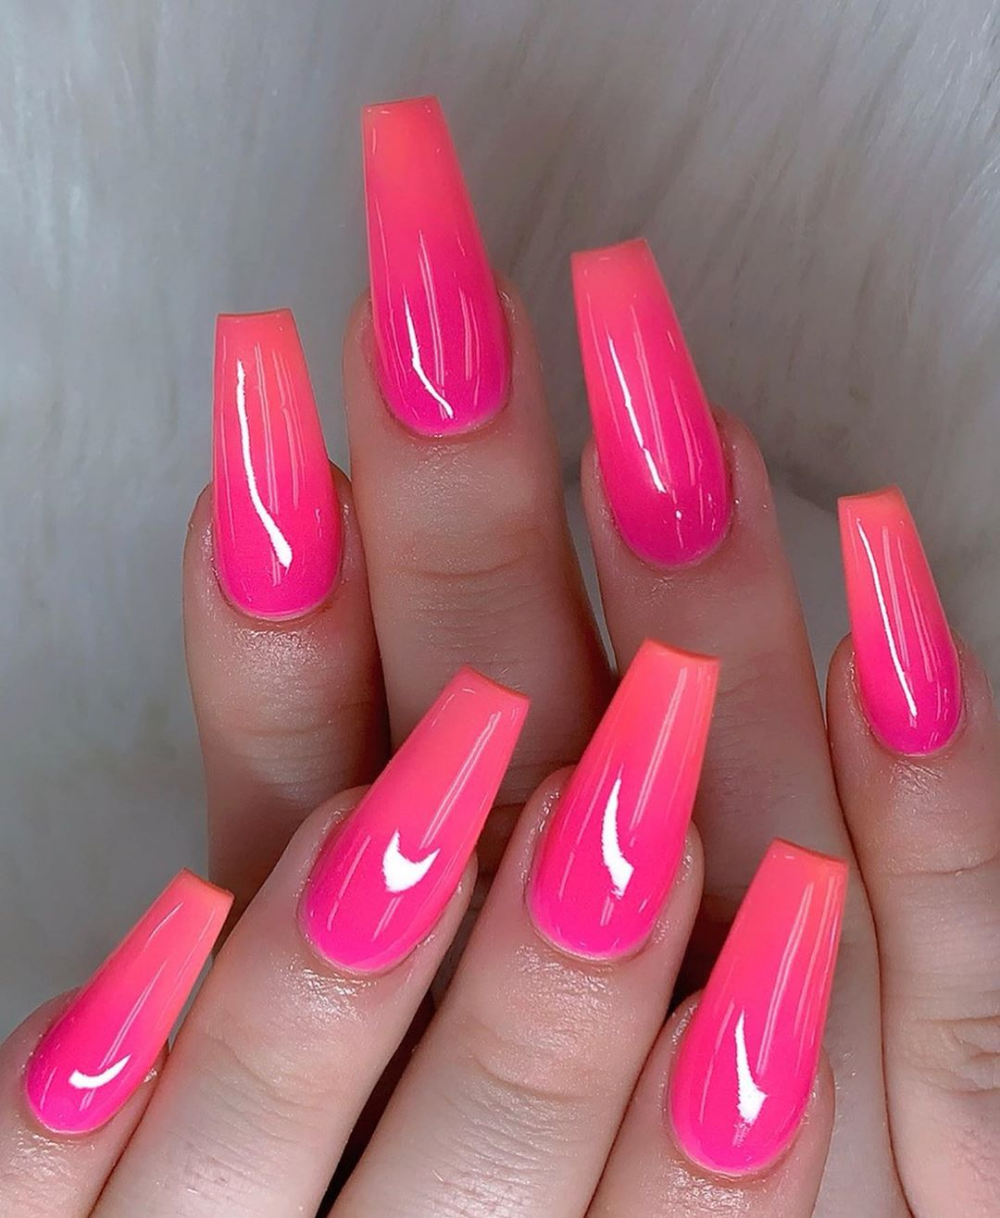 51 Pretty Crystal Nails Art Designs In Summer 2019 With Images Gelove Nehty Nehty Ruzove Nehty